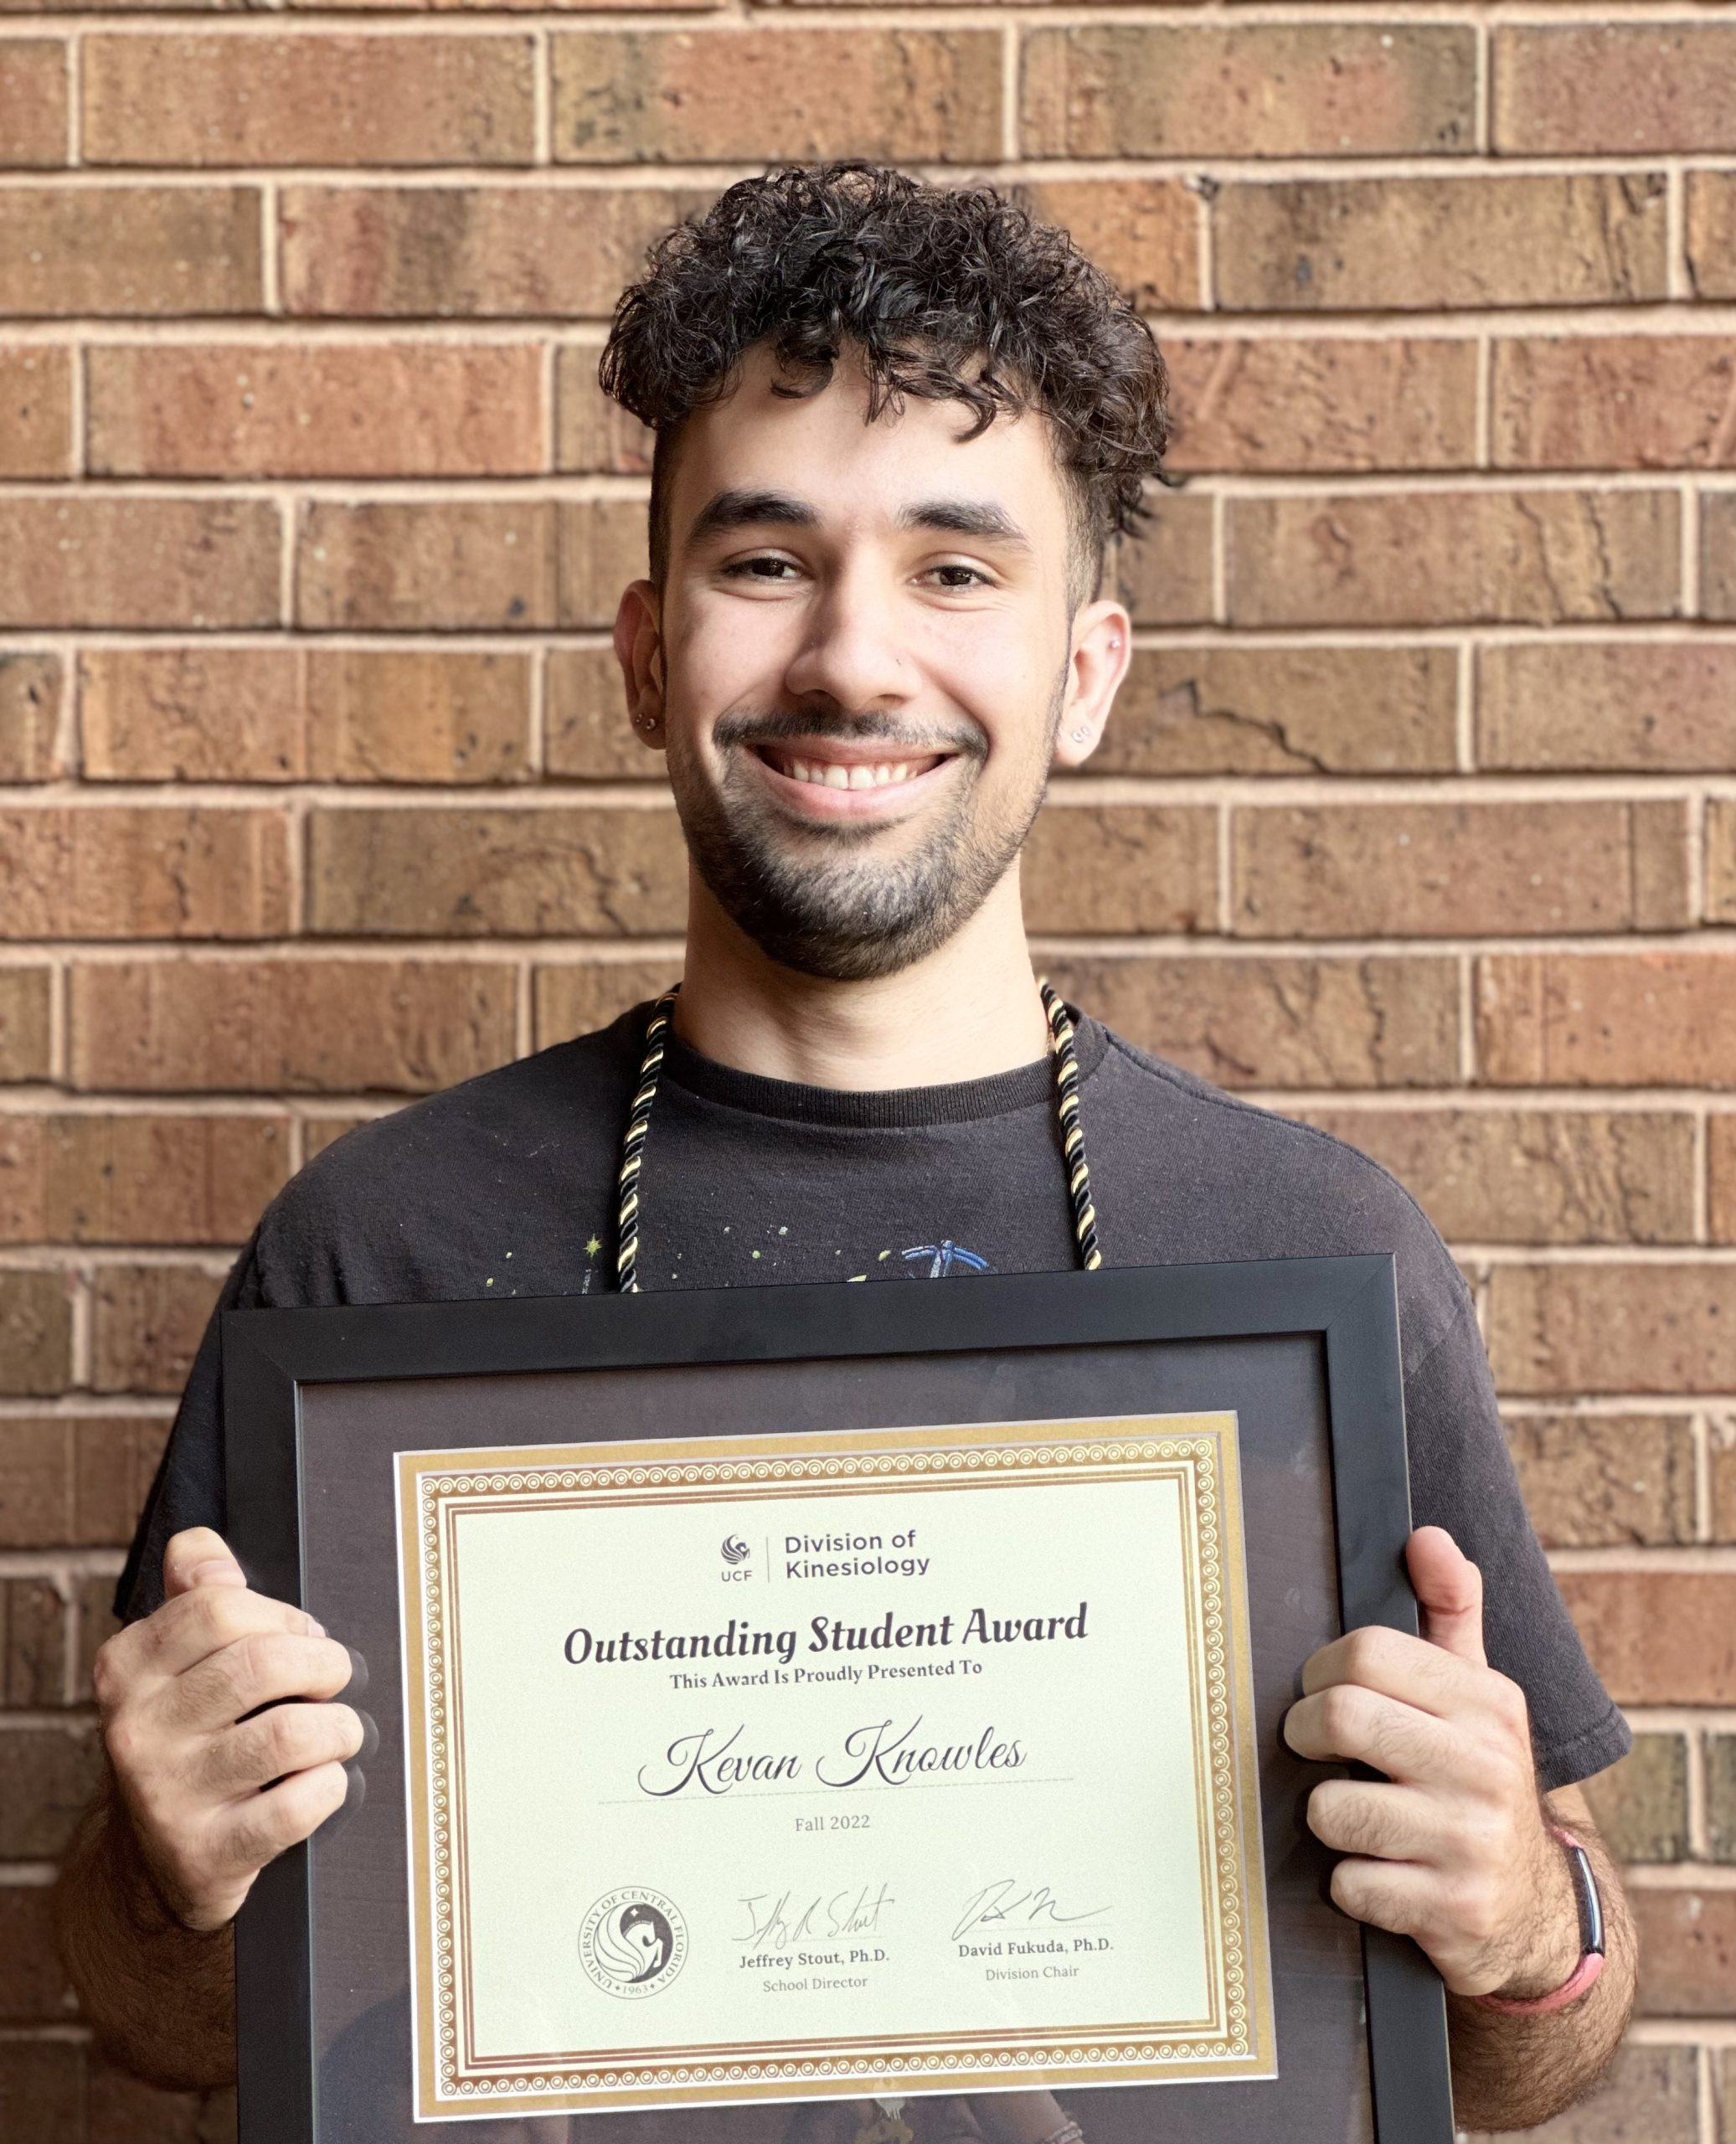 Kevan Knowles Receives Division of Kinesiology Outstanding Student Award